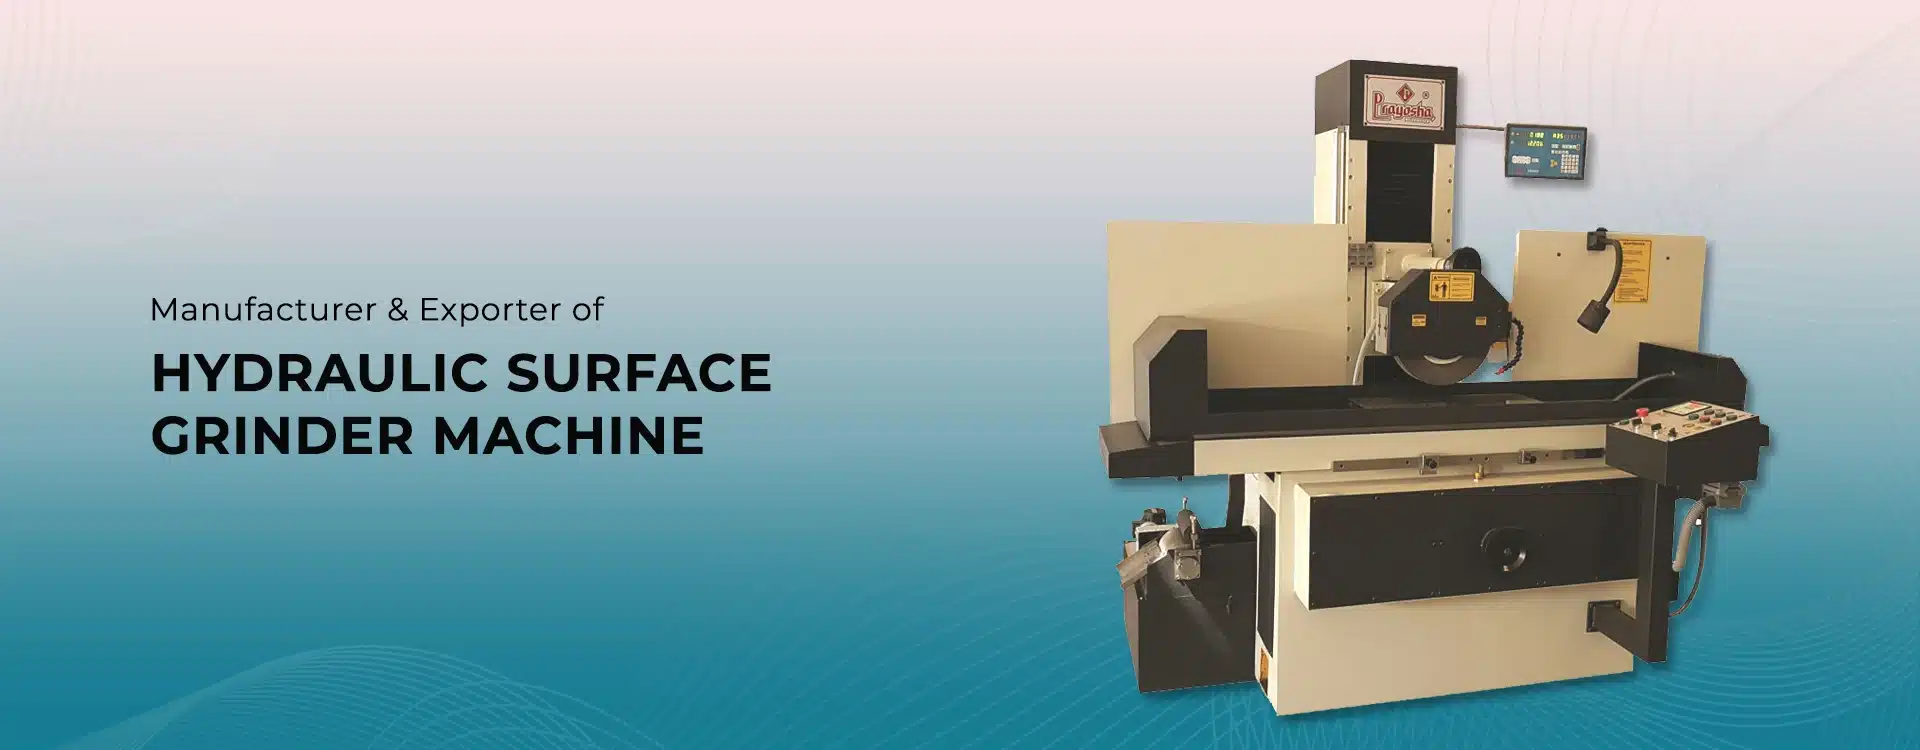 Surface Grinding Machine- Banner2